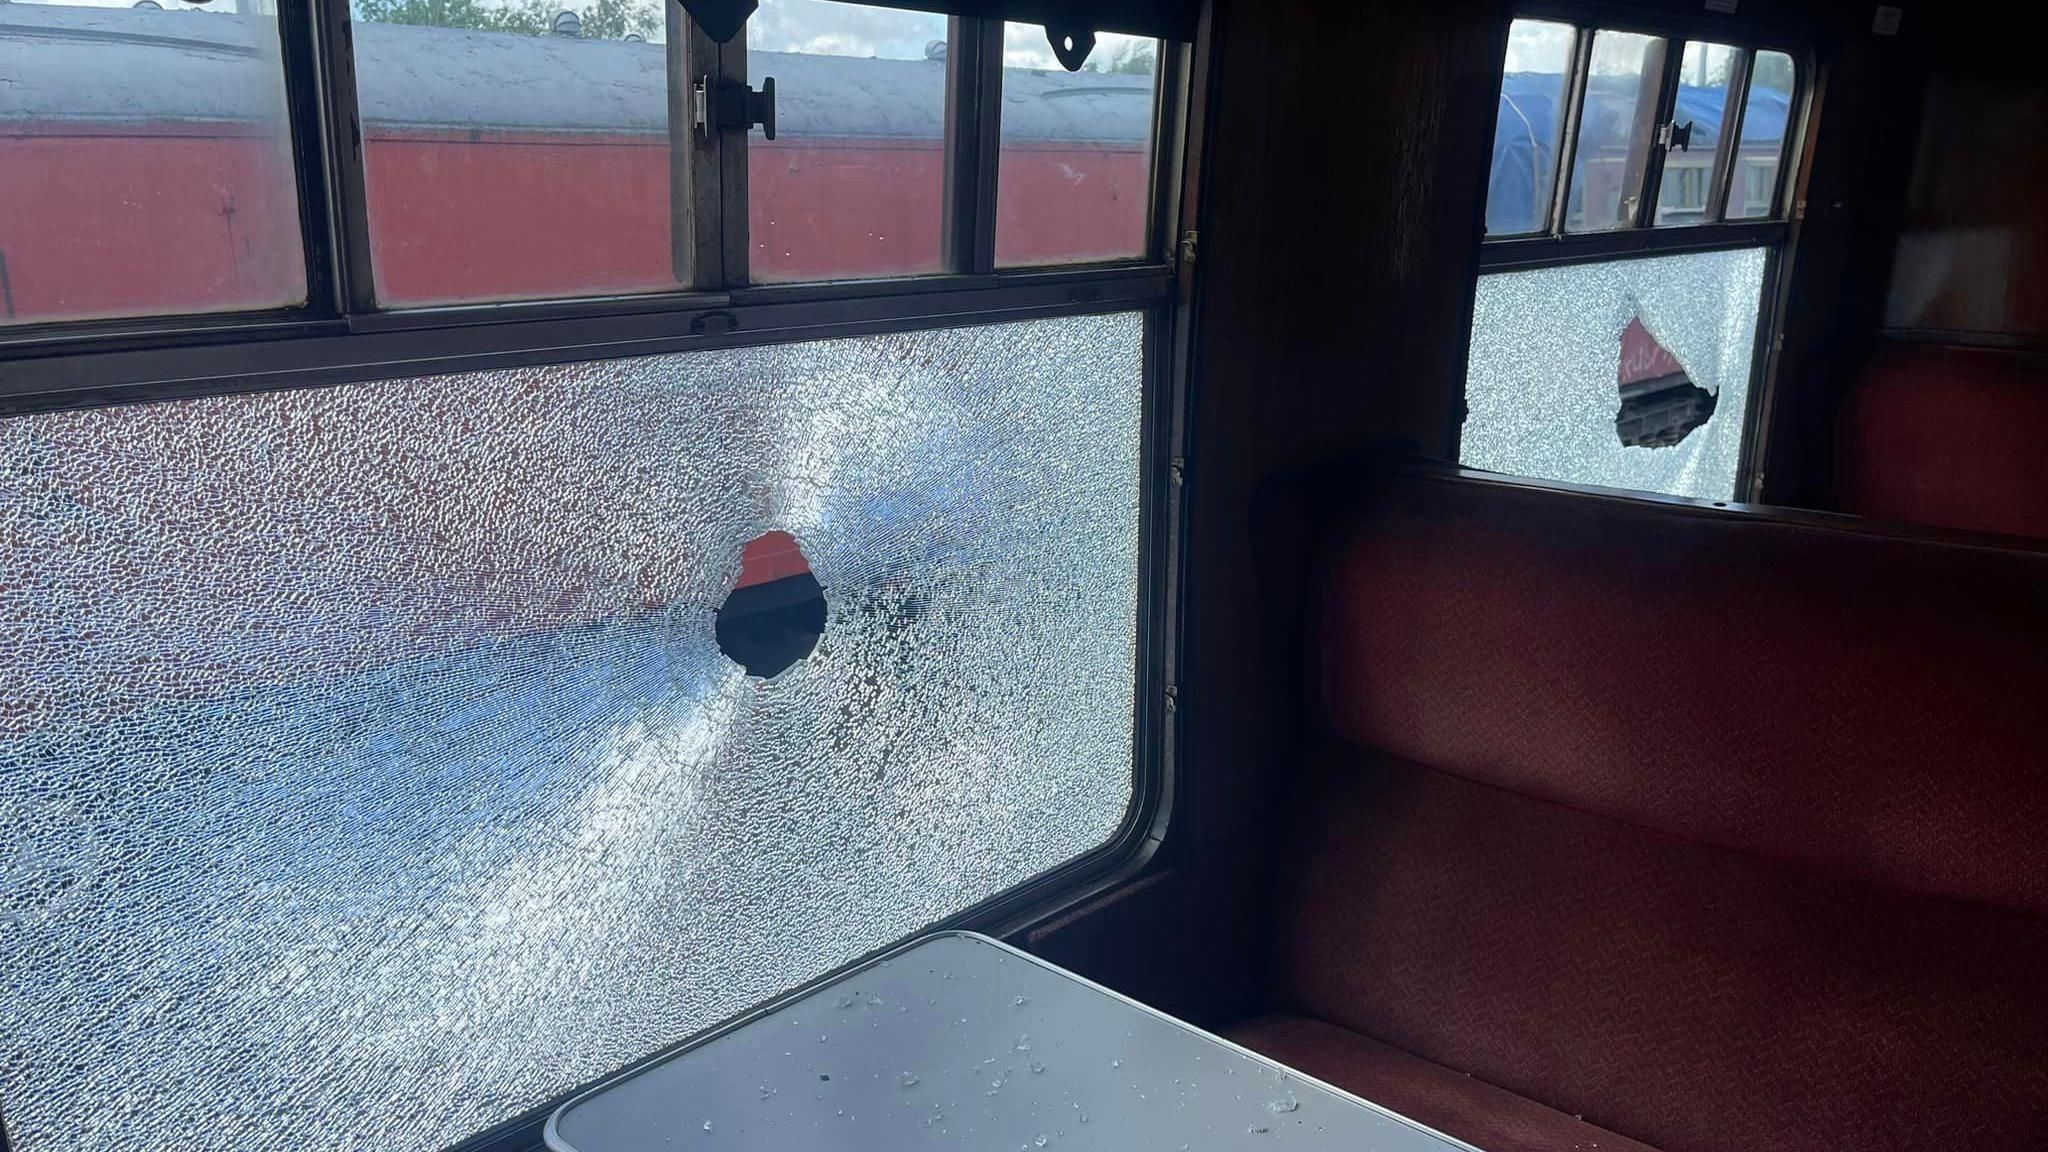 Smashed window in train carriage